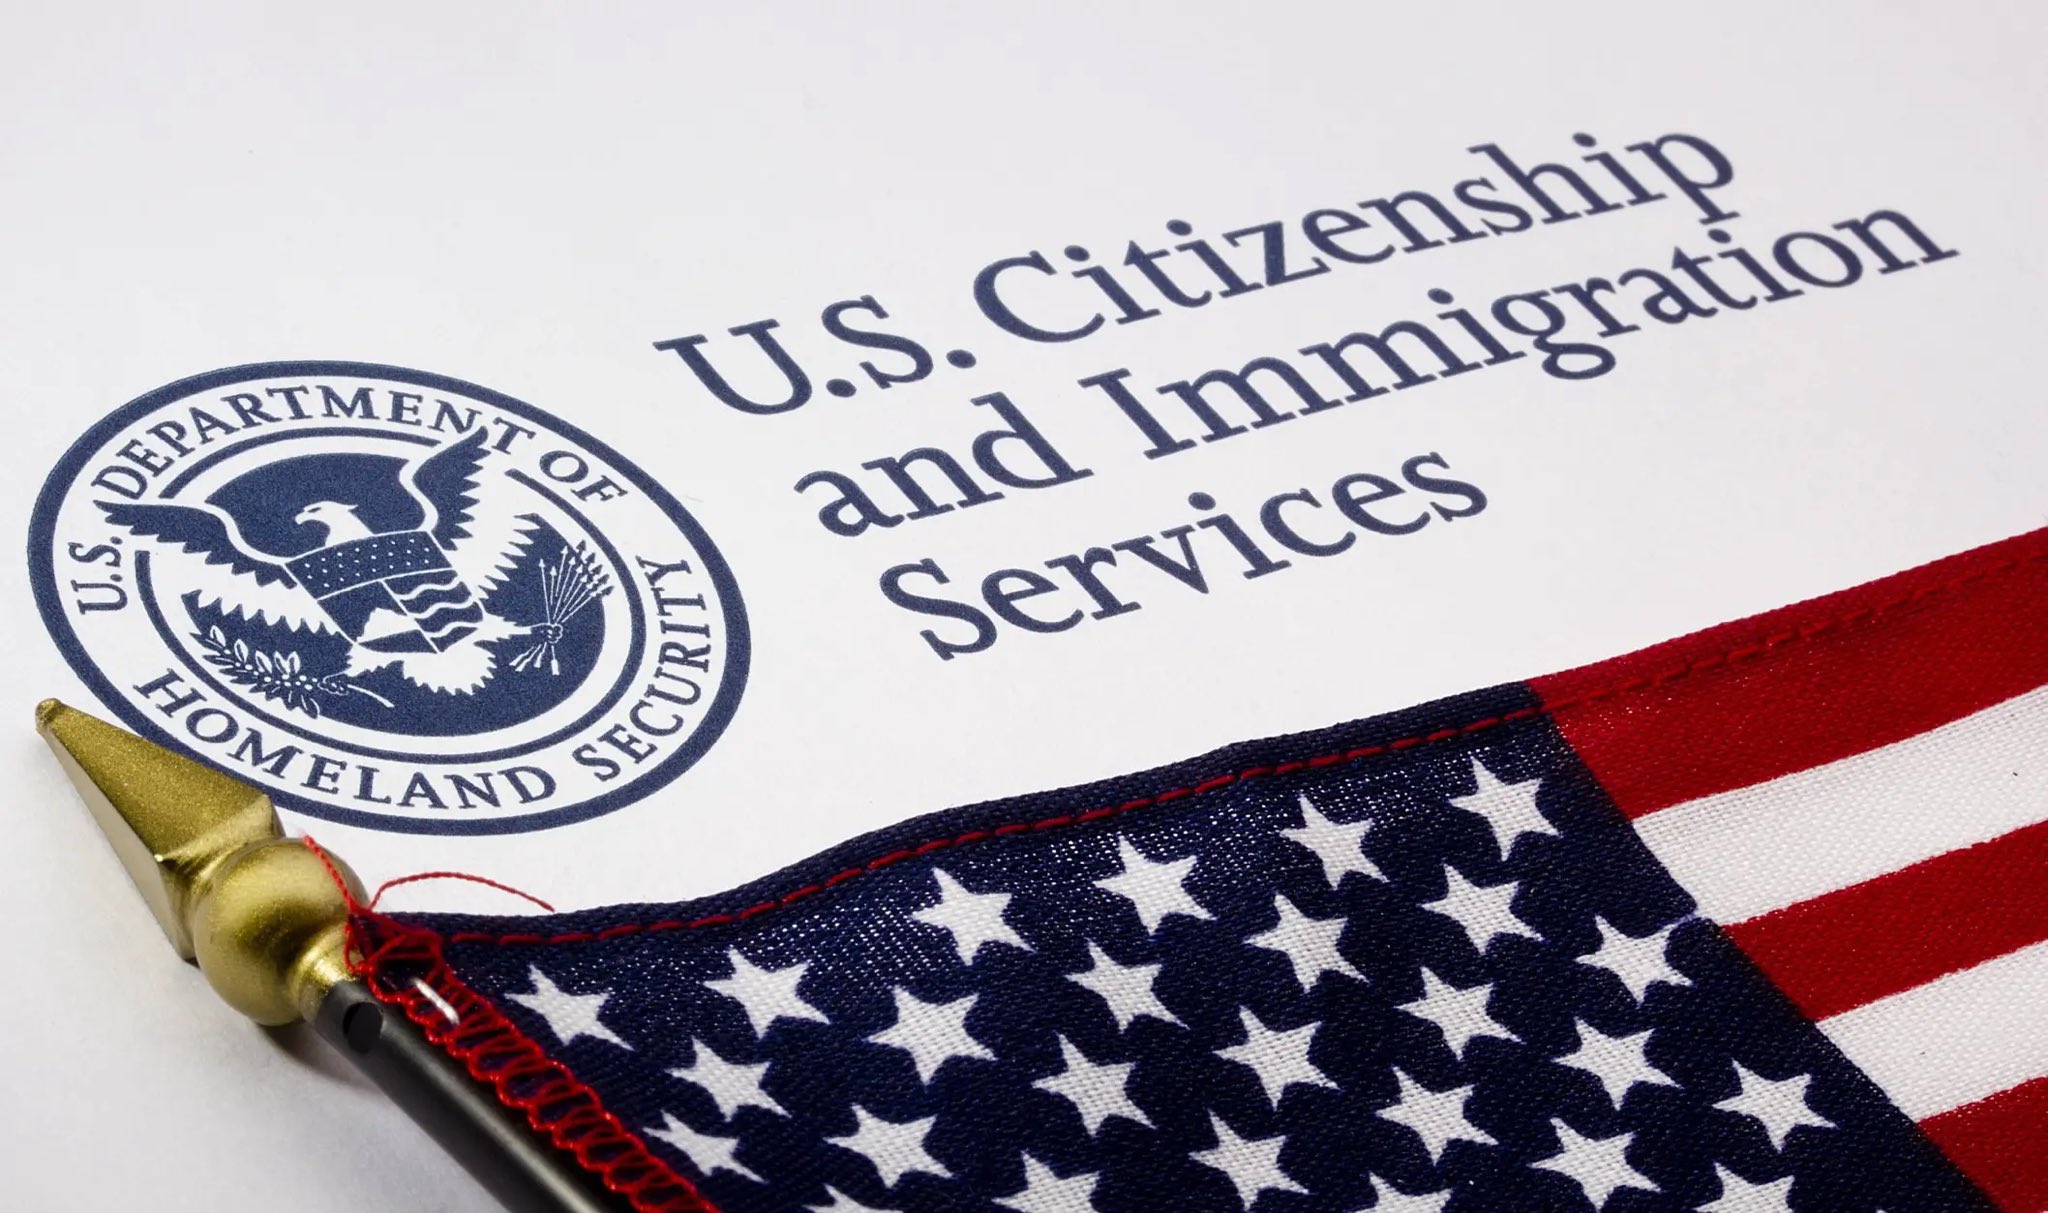 Everything you need to know about rising immigration fees in the US